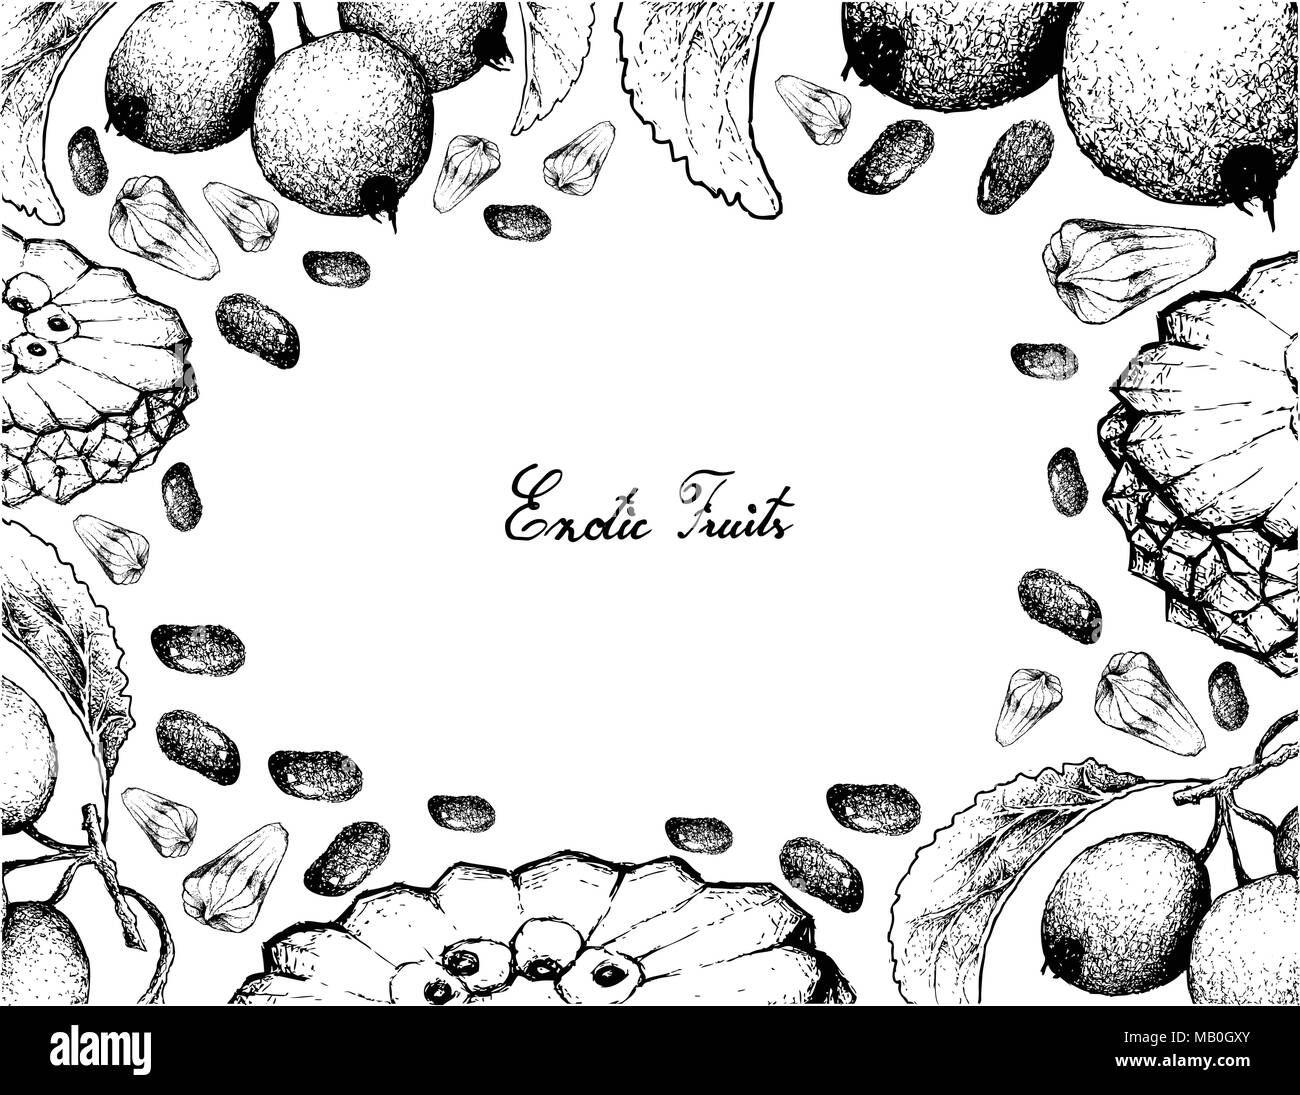 Exotic Fruit, Illustration Frame of Hand Drawn Sketch of Crabapple and Pindaiva, Pindaiba, Pindauva or Perovana Fruits Isolated on White Background. Stock Vector